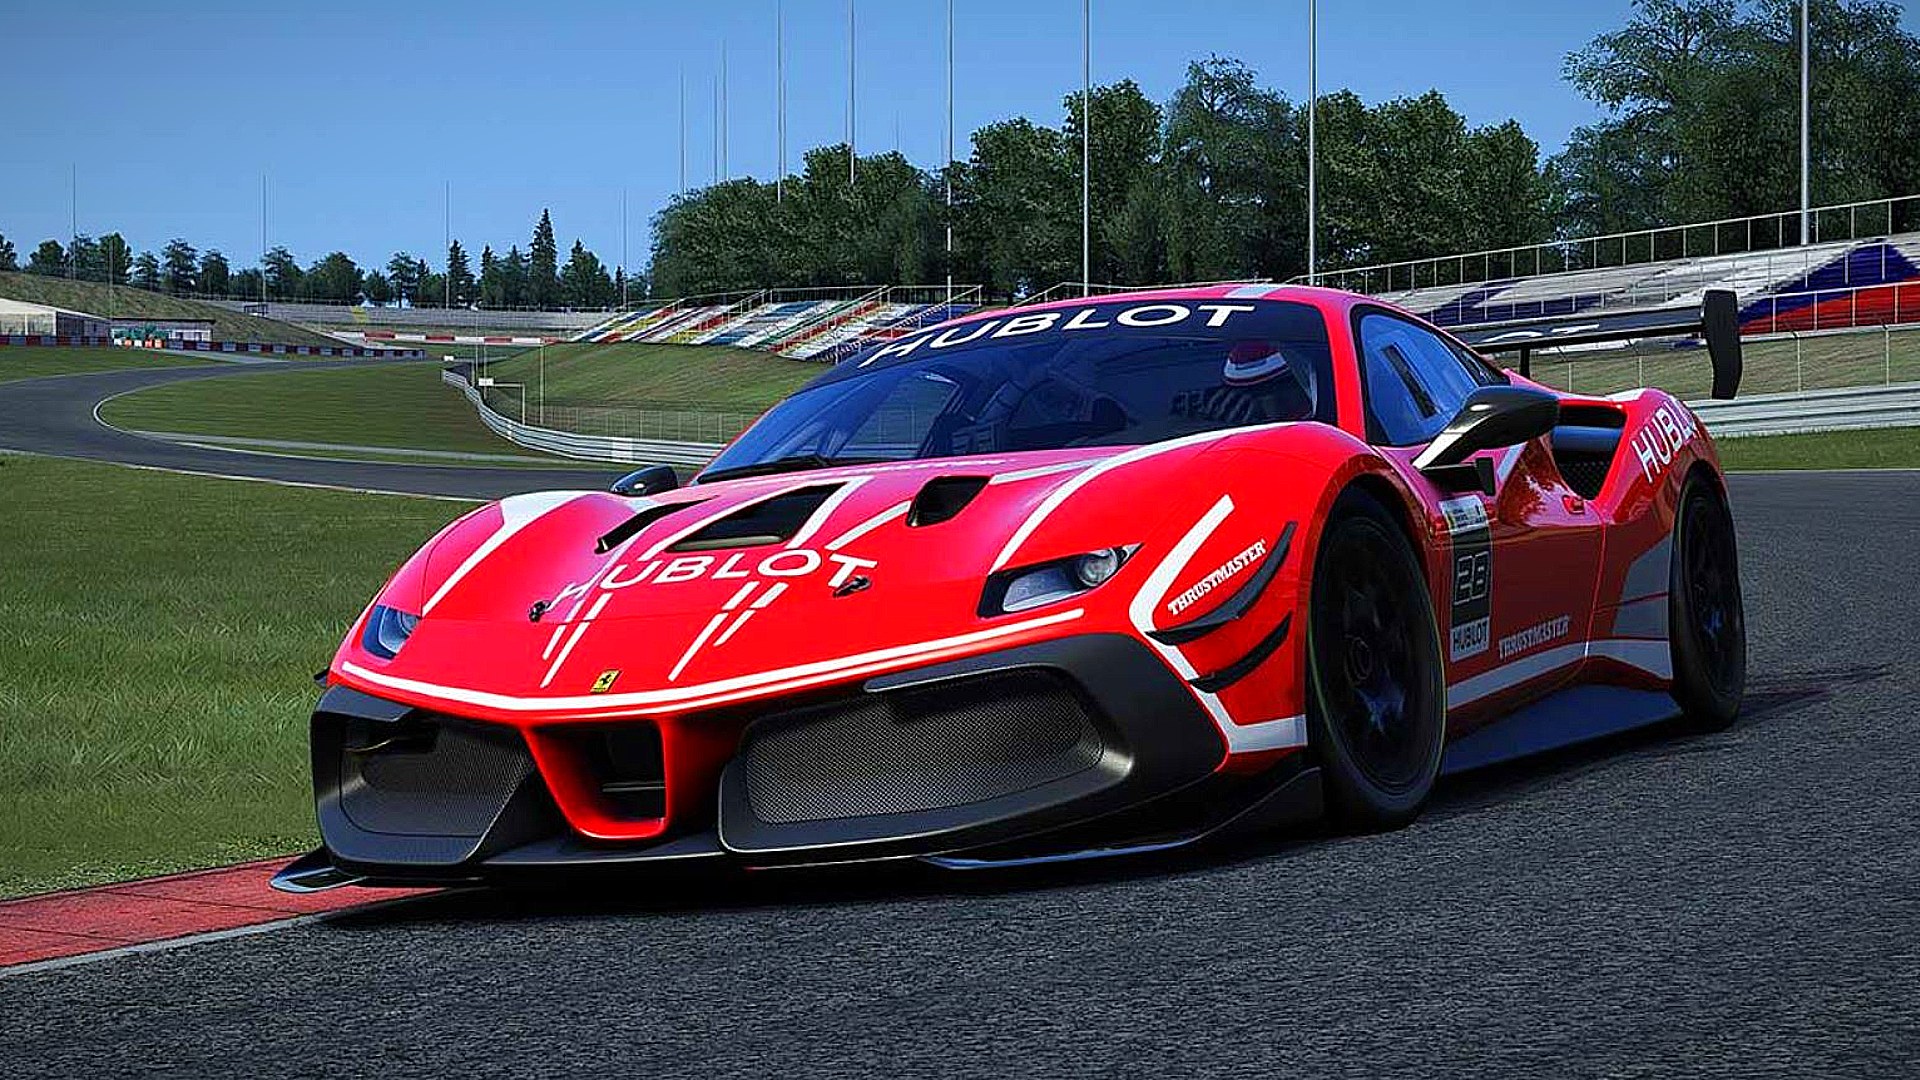 Best racing games: a red sports car on the track in Assetto Corsa